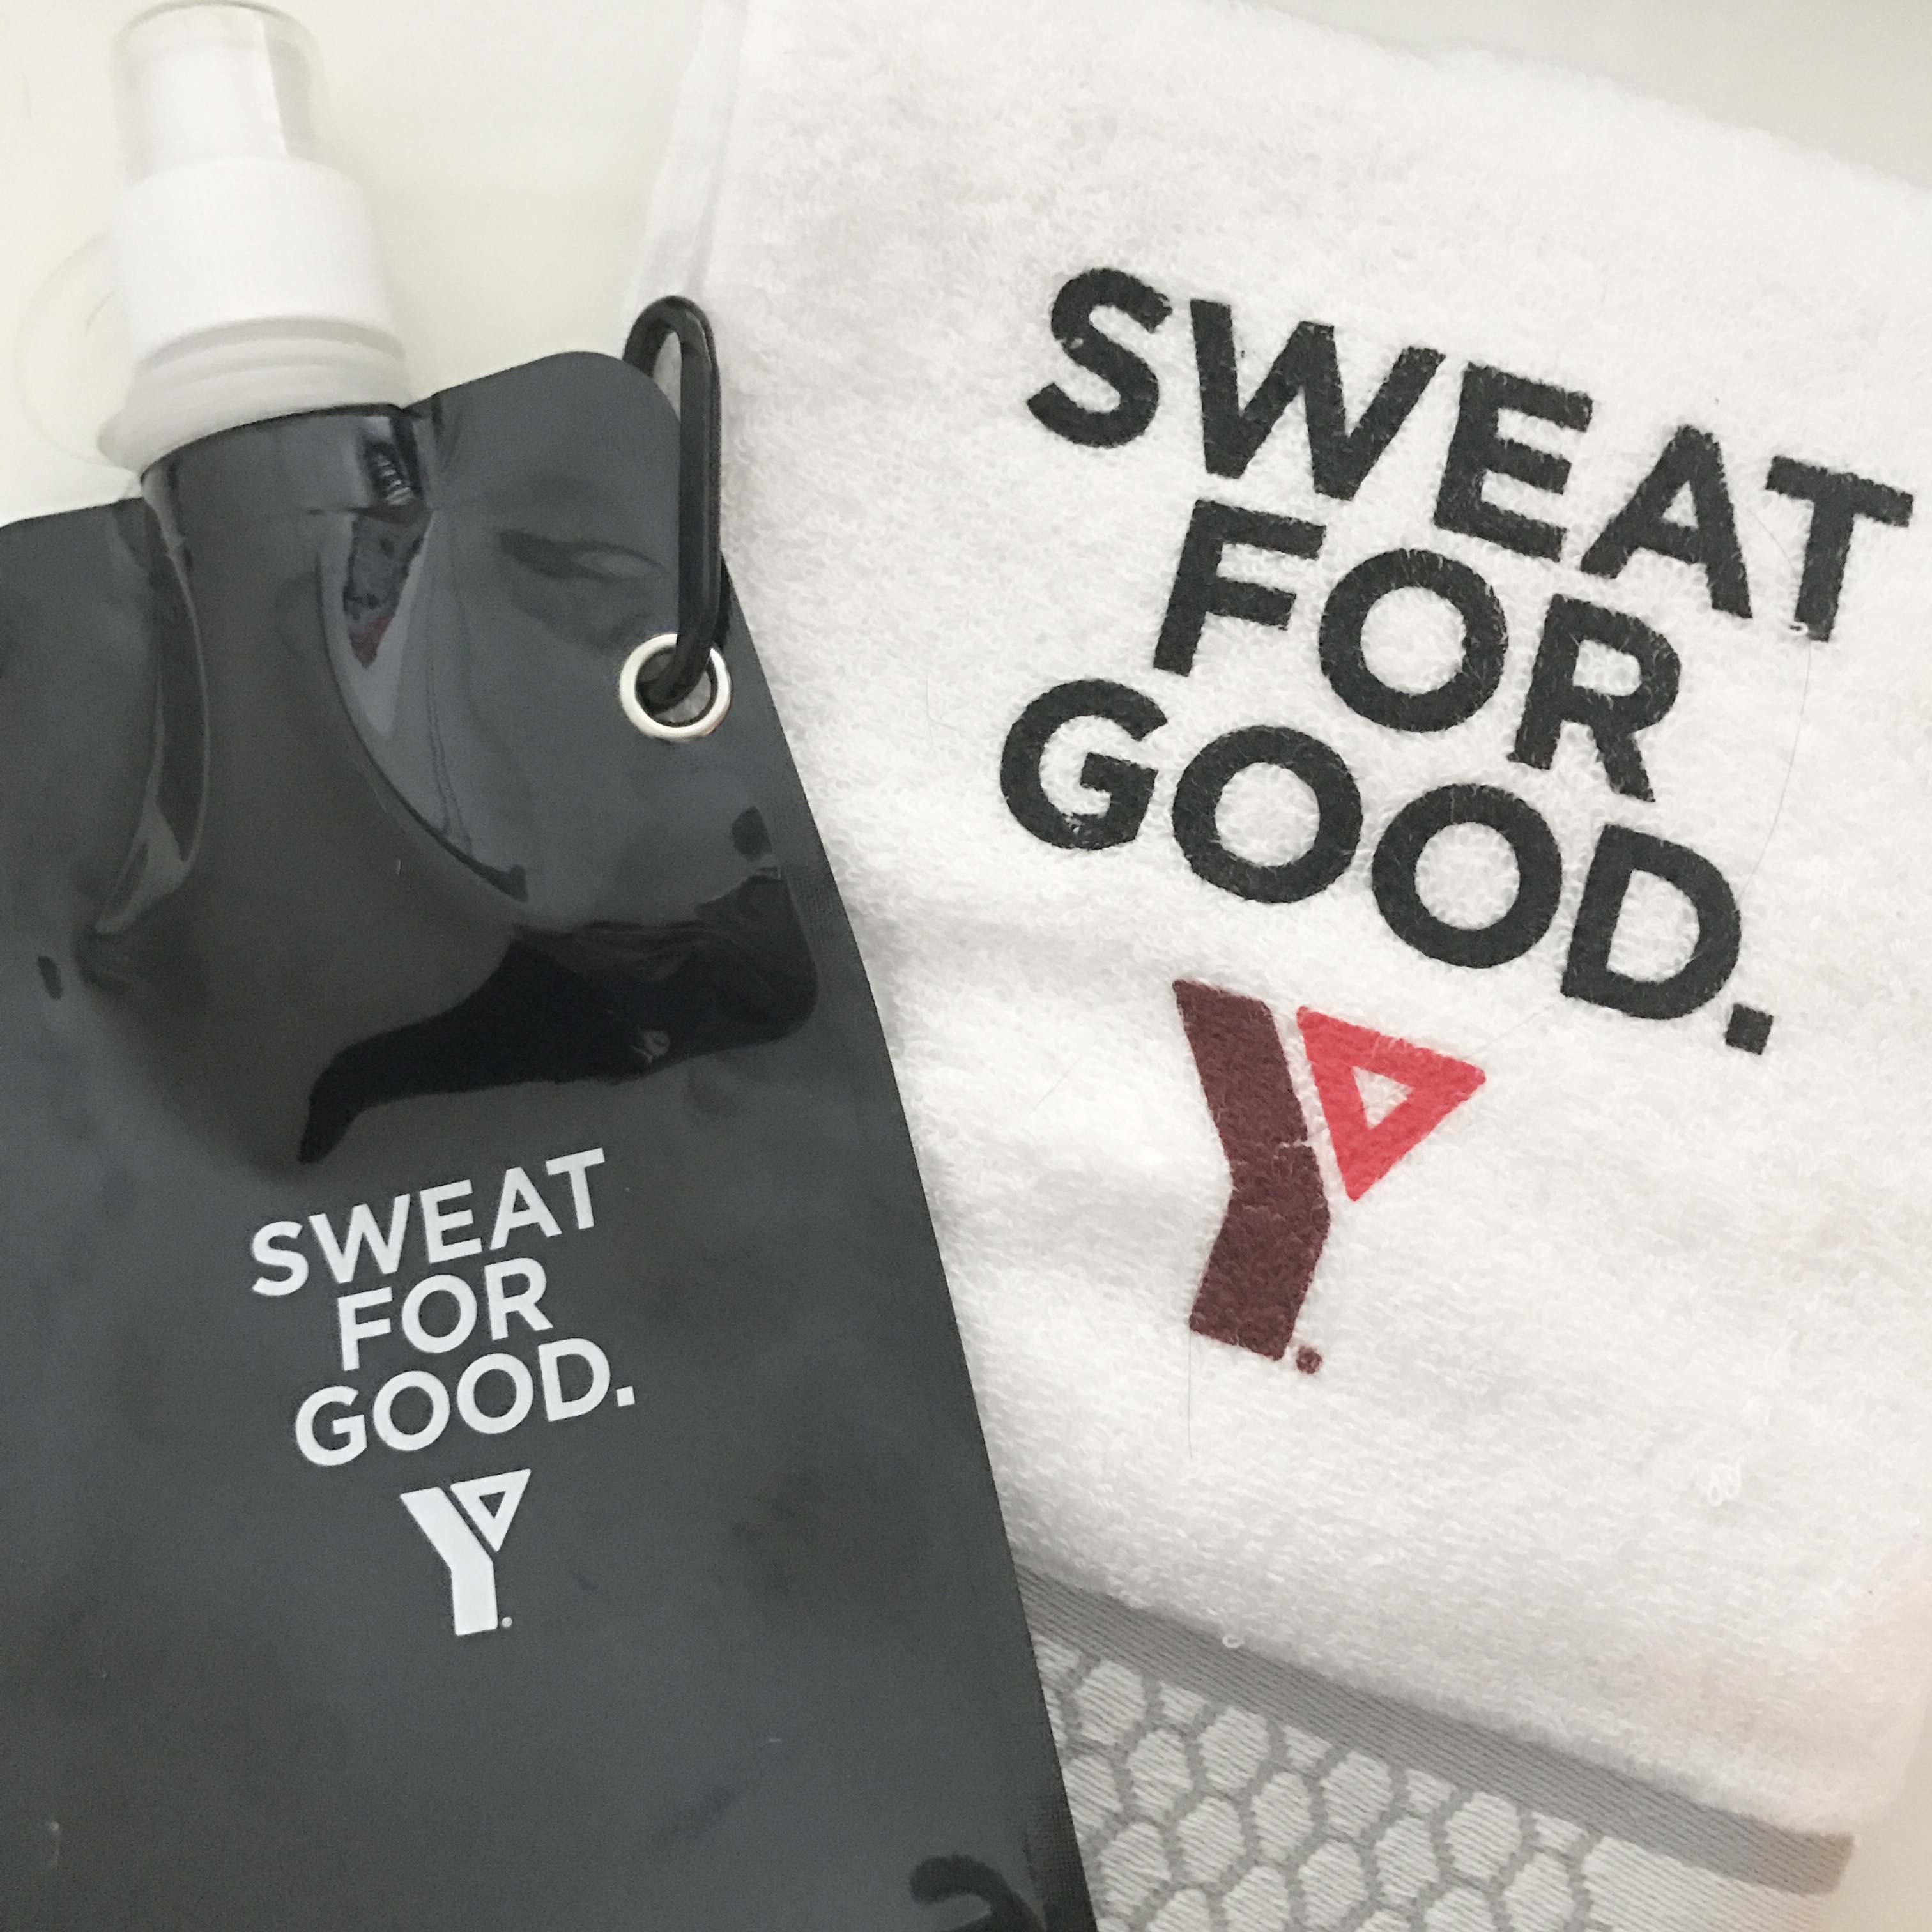 Sweat for Good towel and bottle